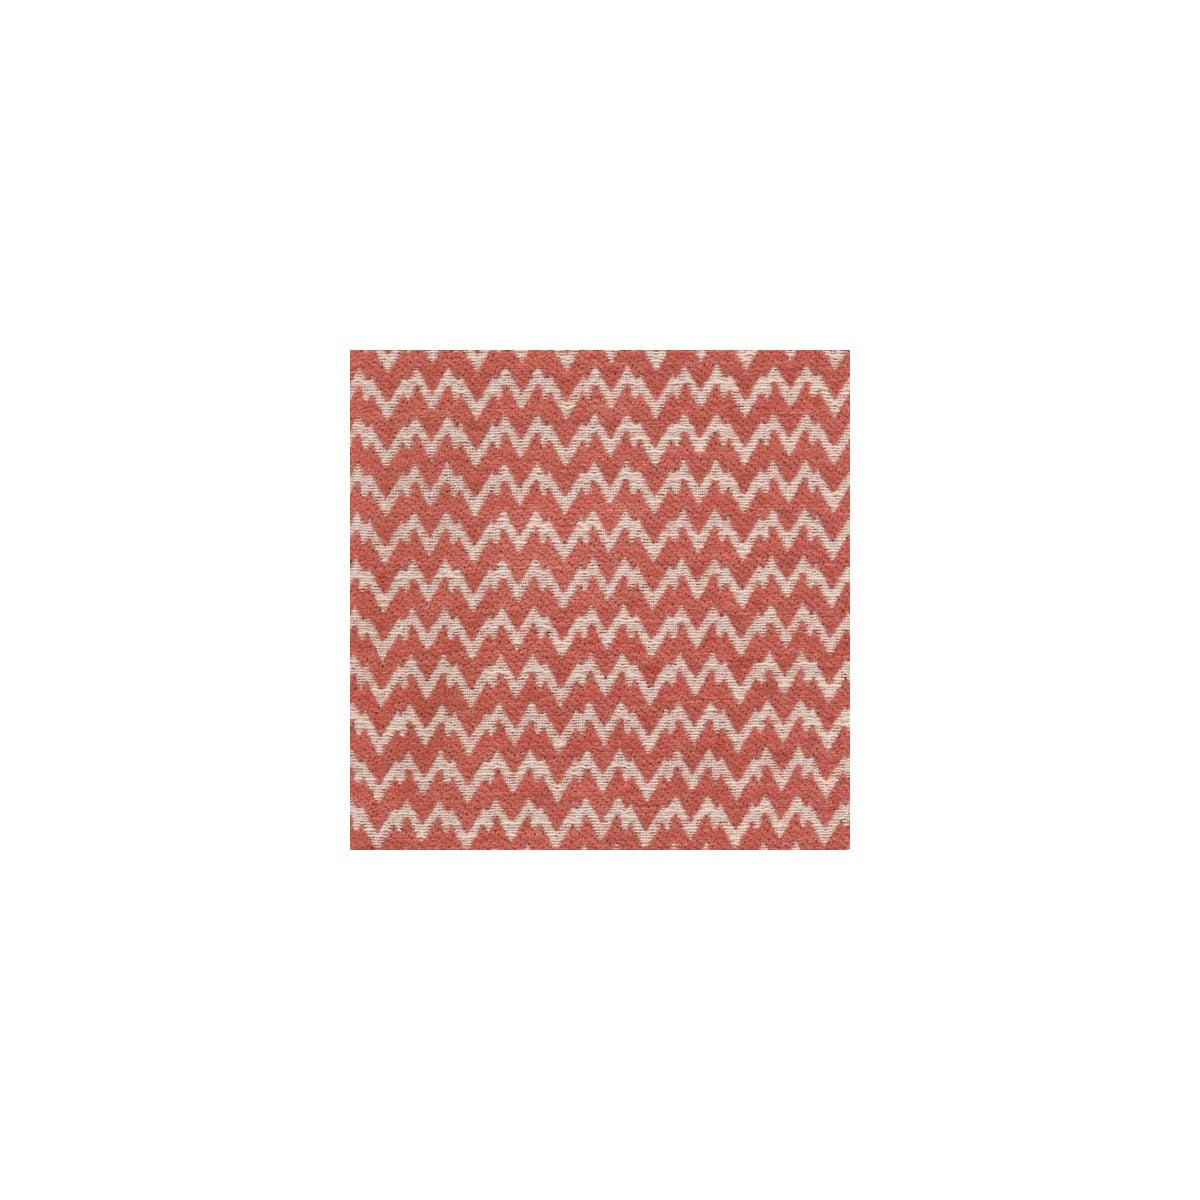 Bergen * - Coral - Fabric By the Yard